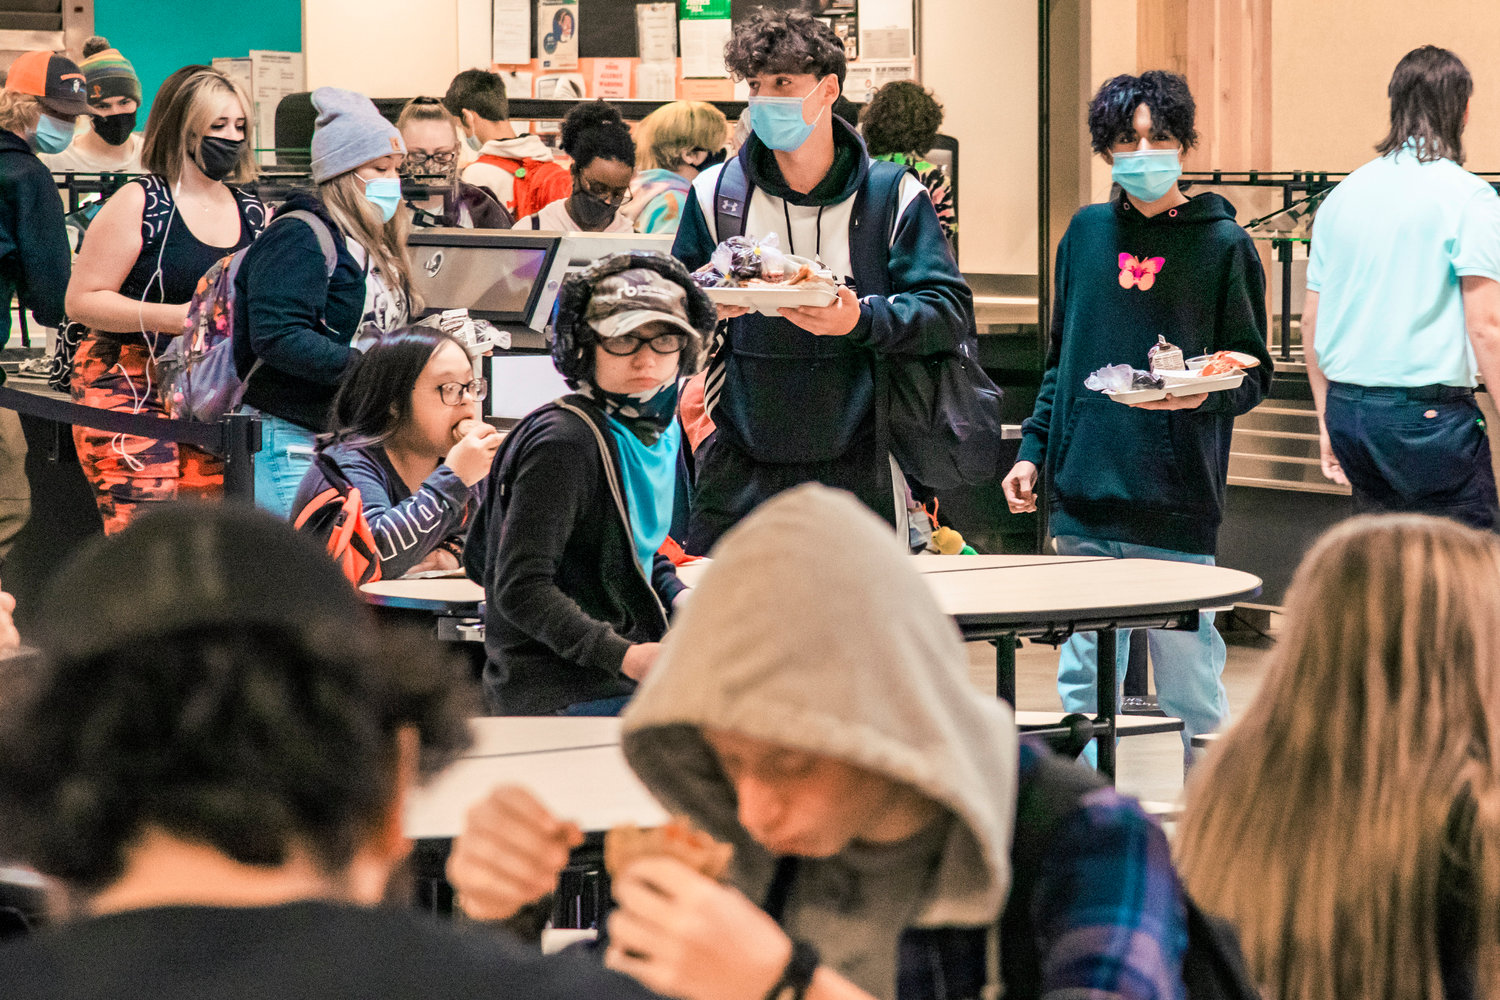 At Centralia High School students are now allowed to sit without masks and eat at a table with their peers, but only in groups of four during lunch.